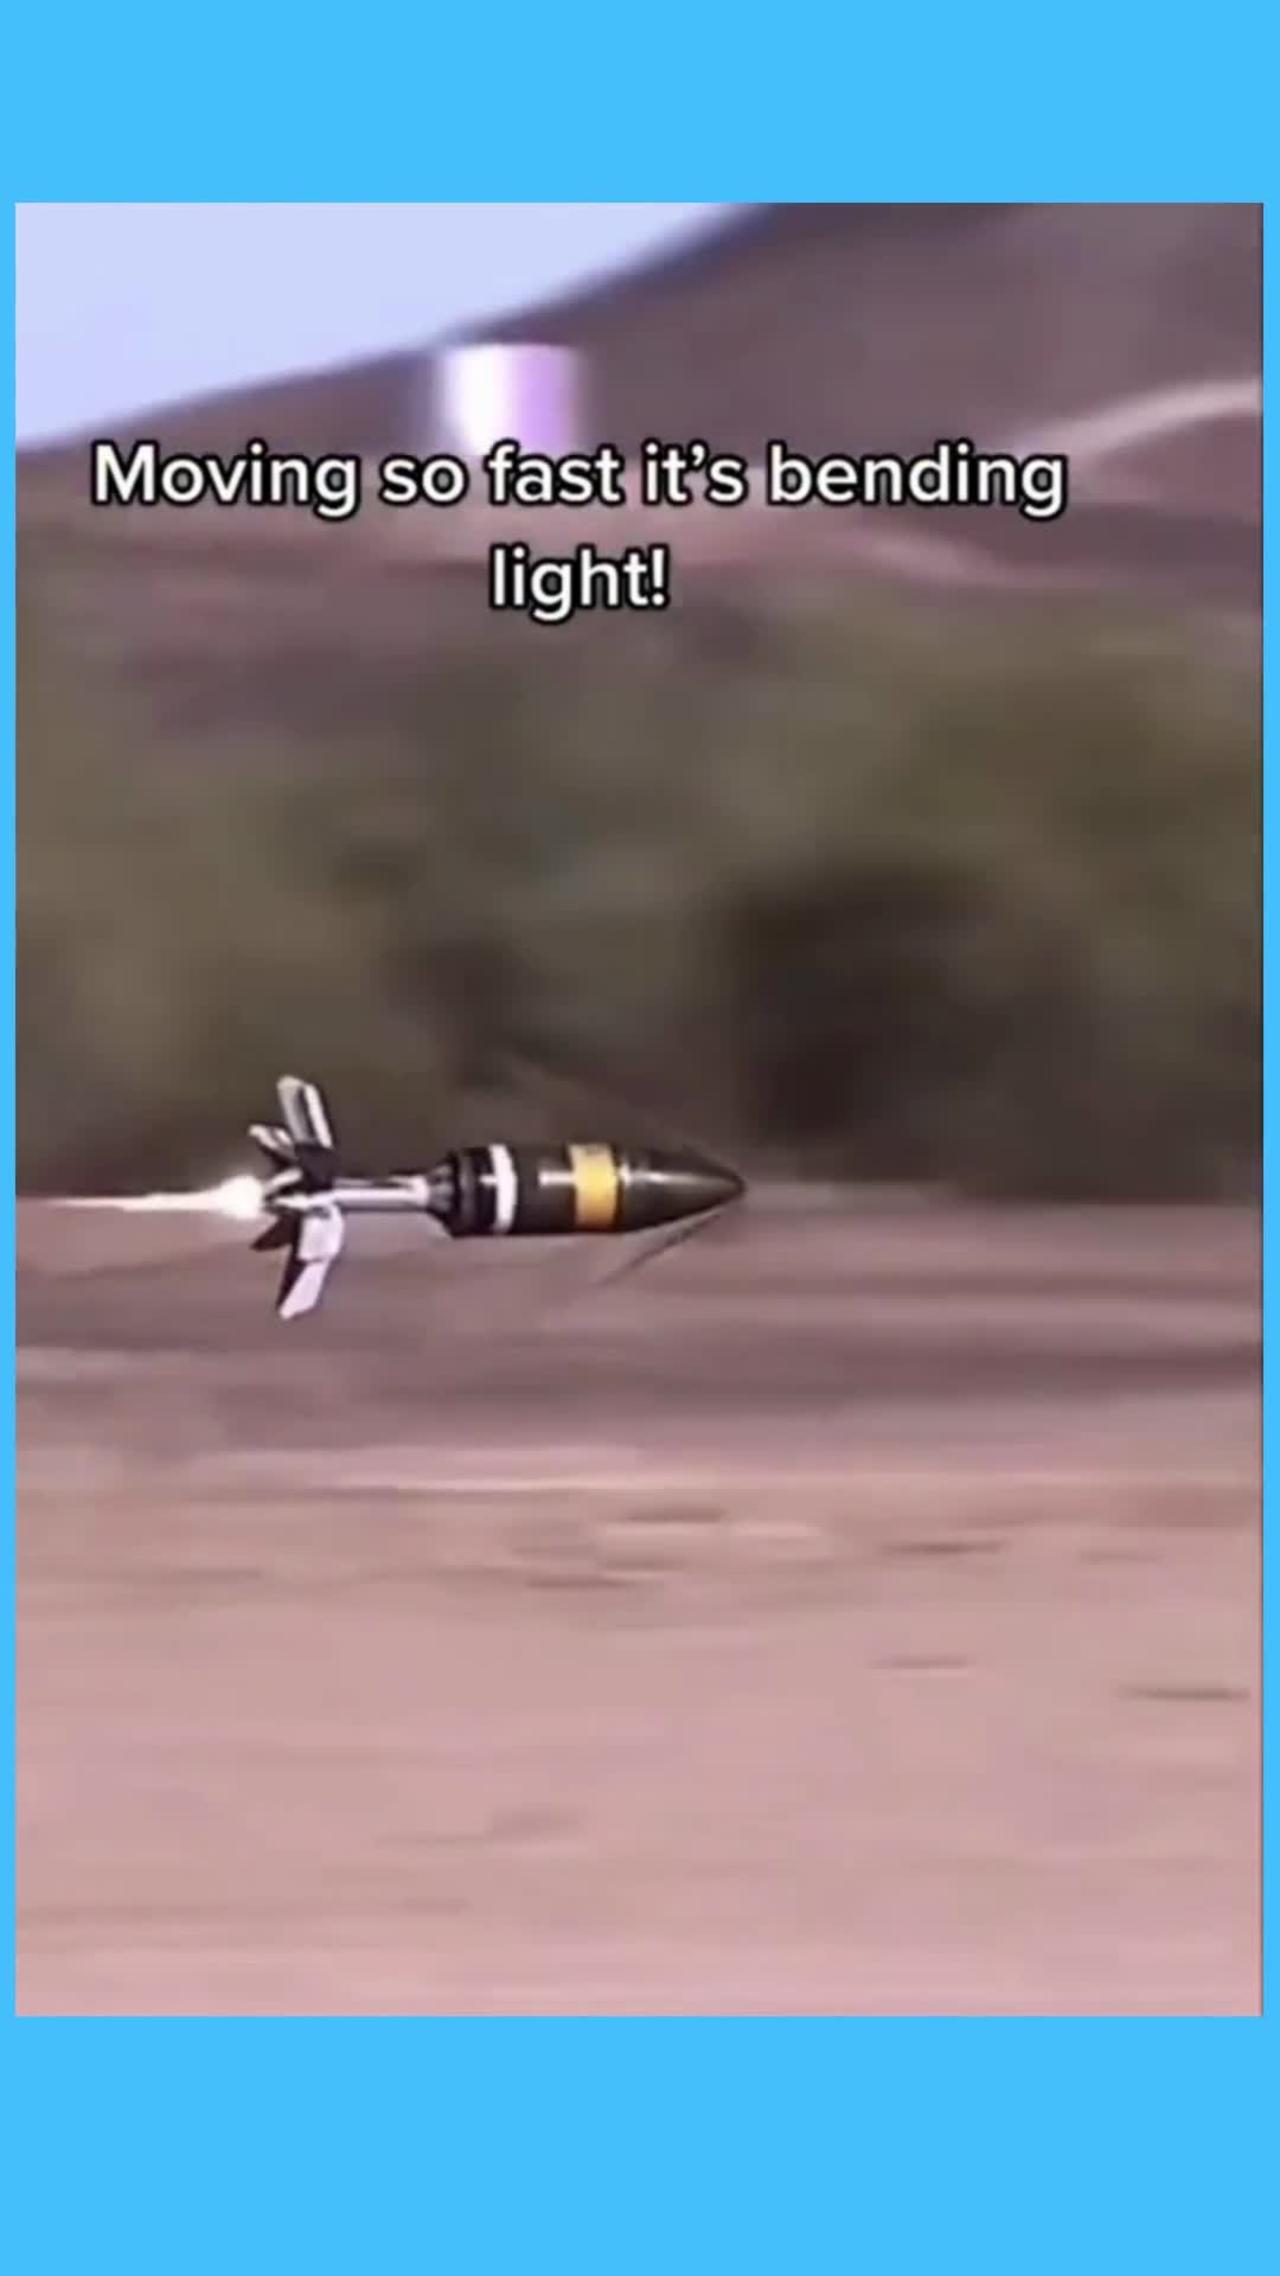 The Best Slow-Mo Video to Watch, military wepons